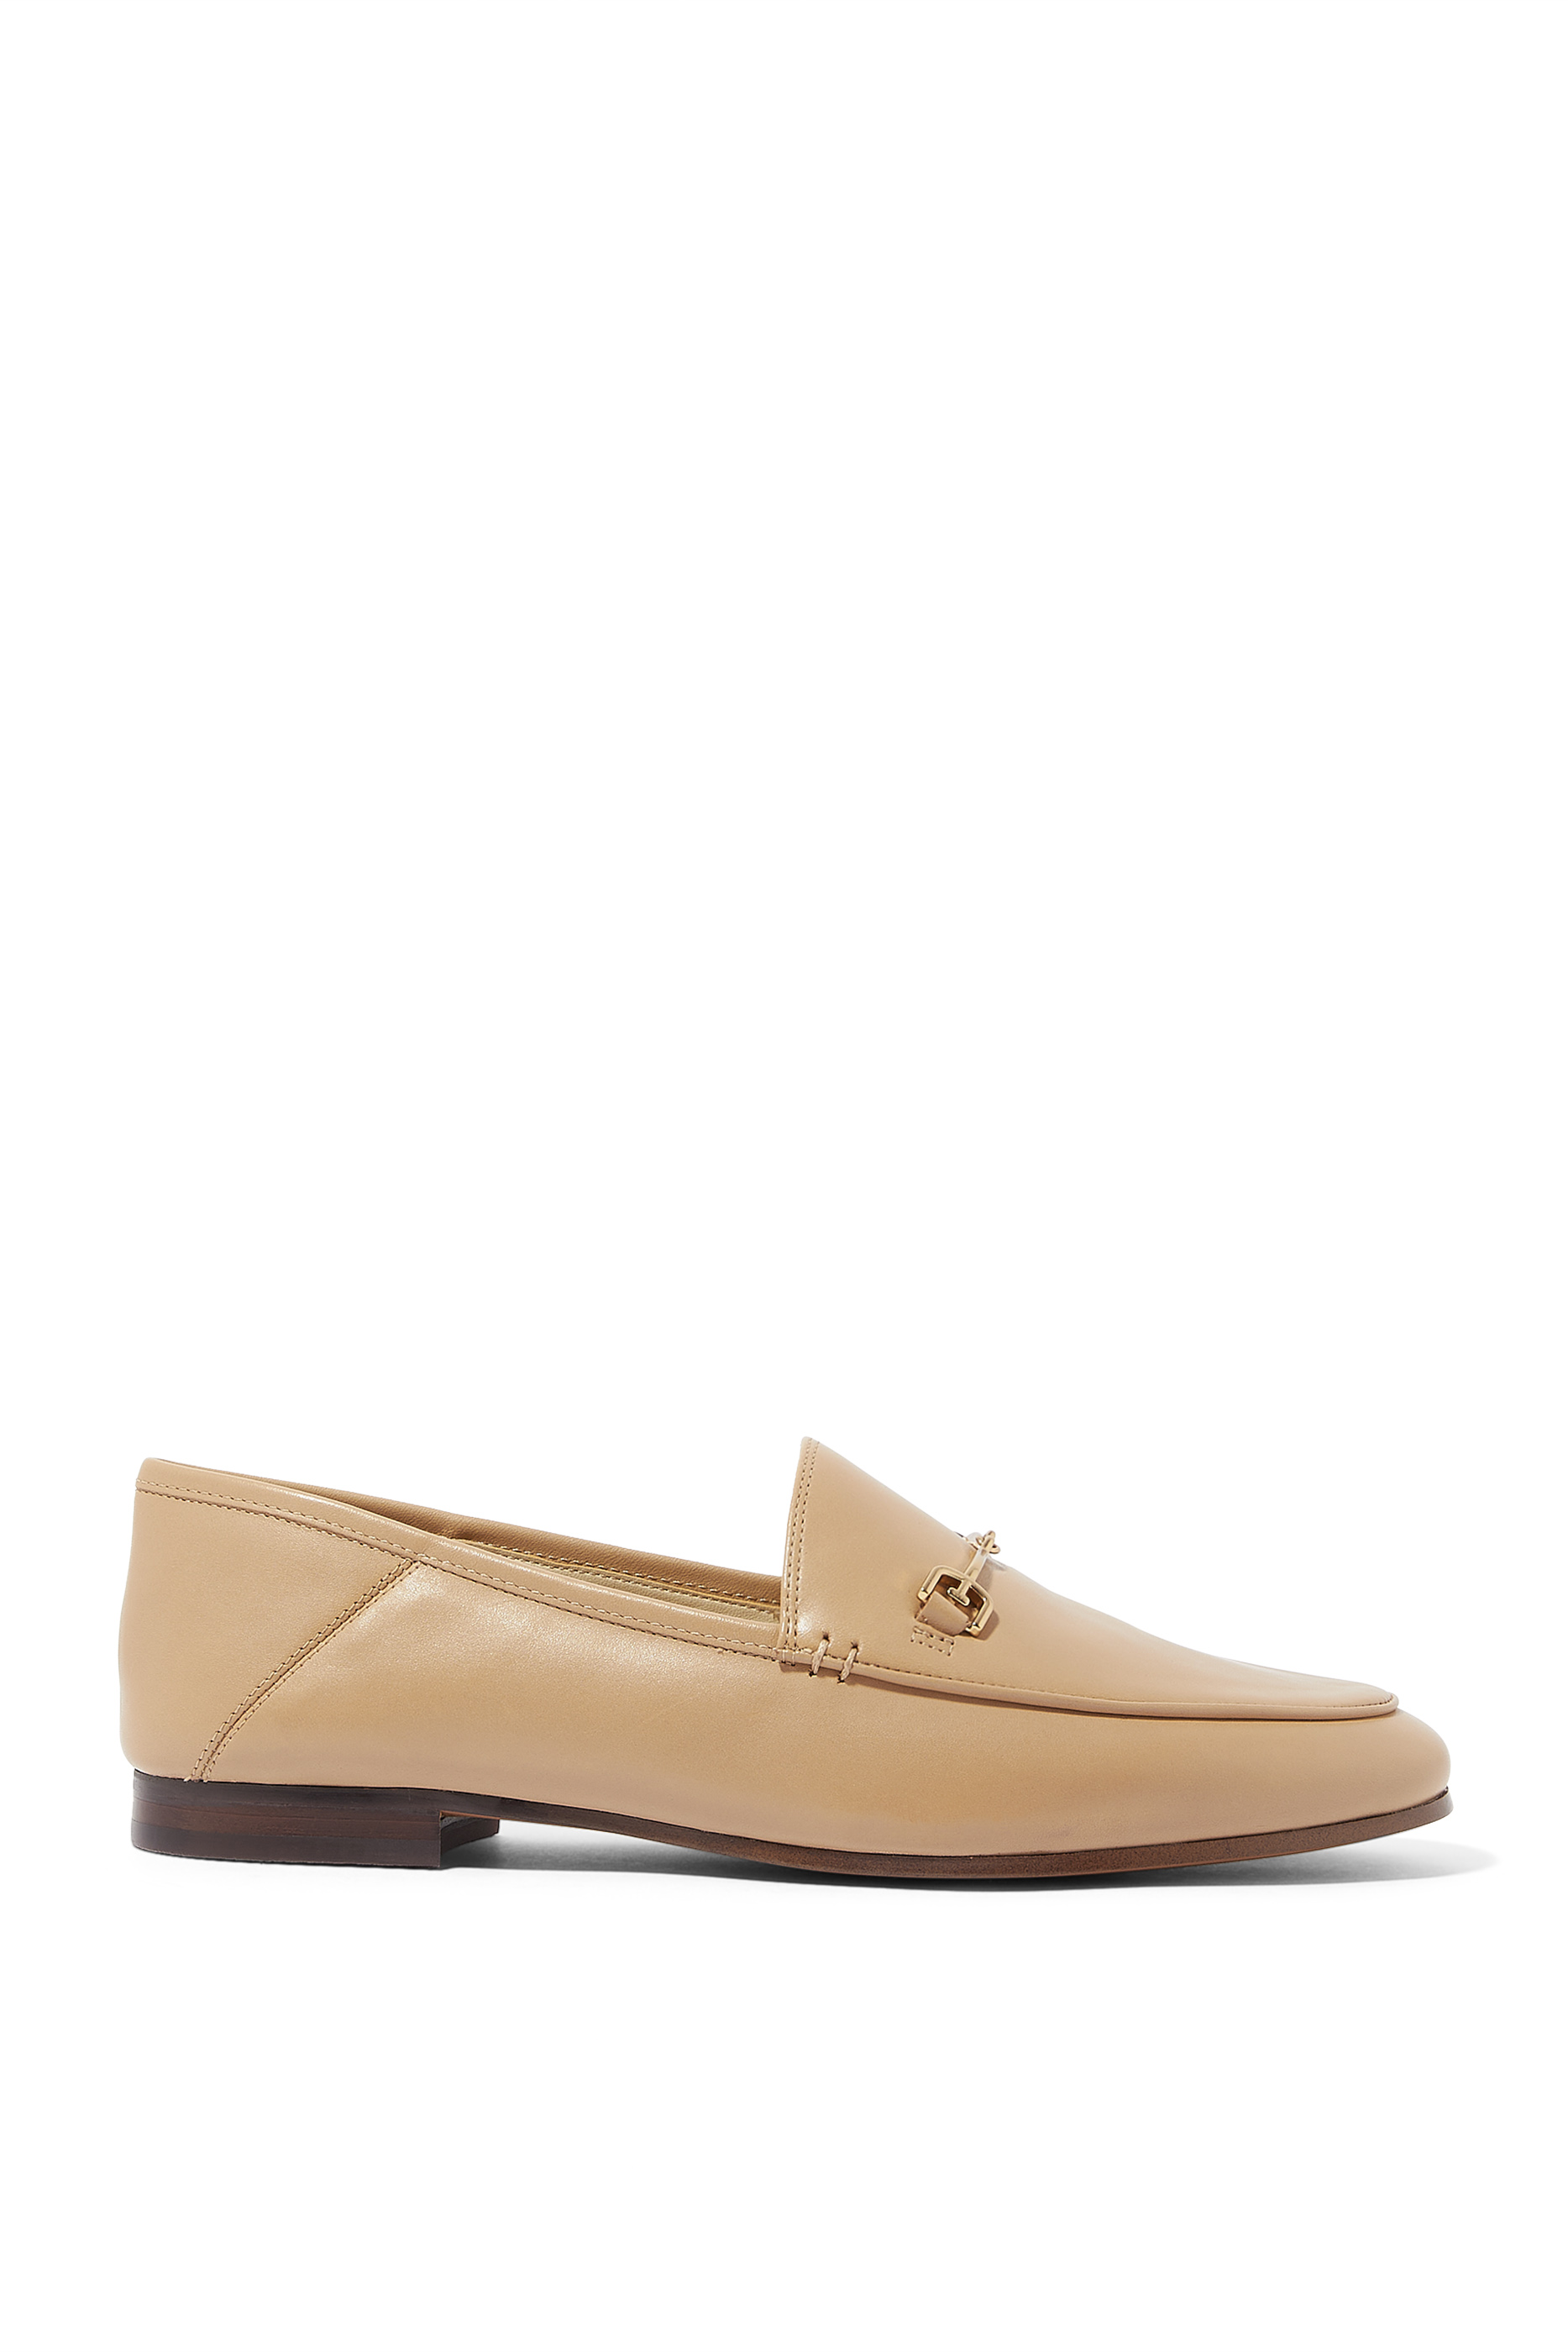 Buy Sam Edelman Loraine Leather Loafers for Womens | Bloomingdale's Kuwait